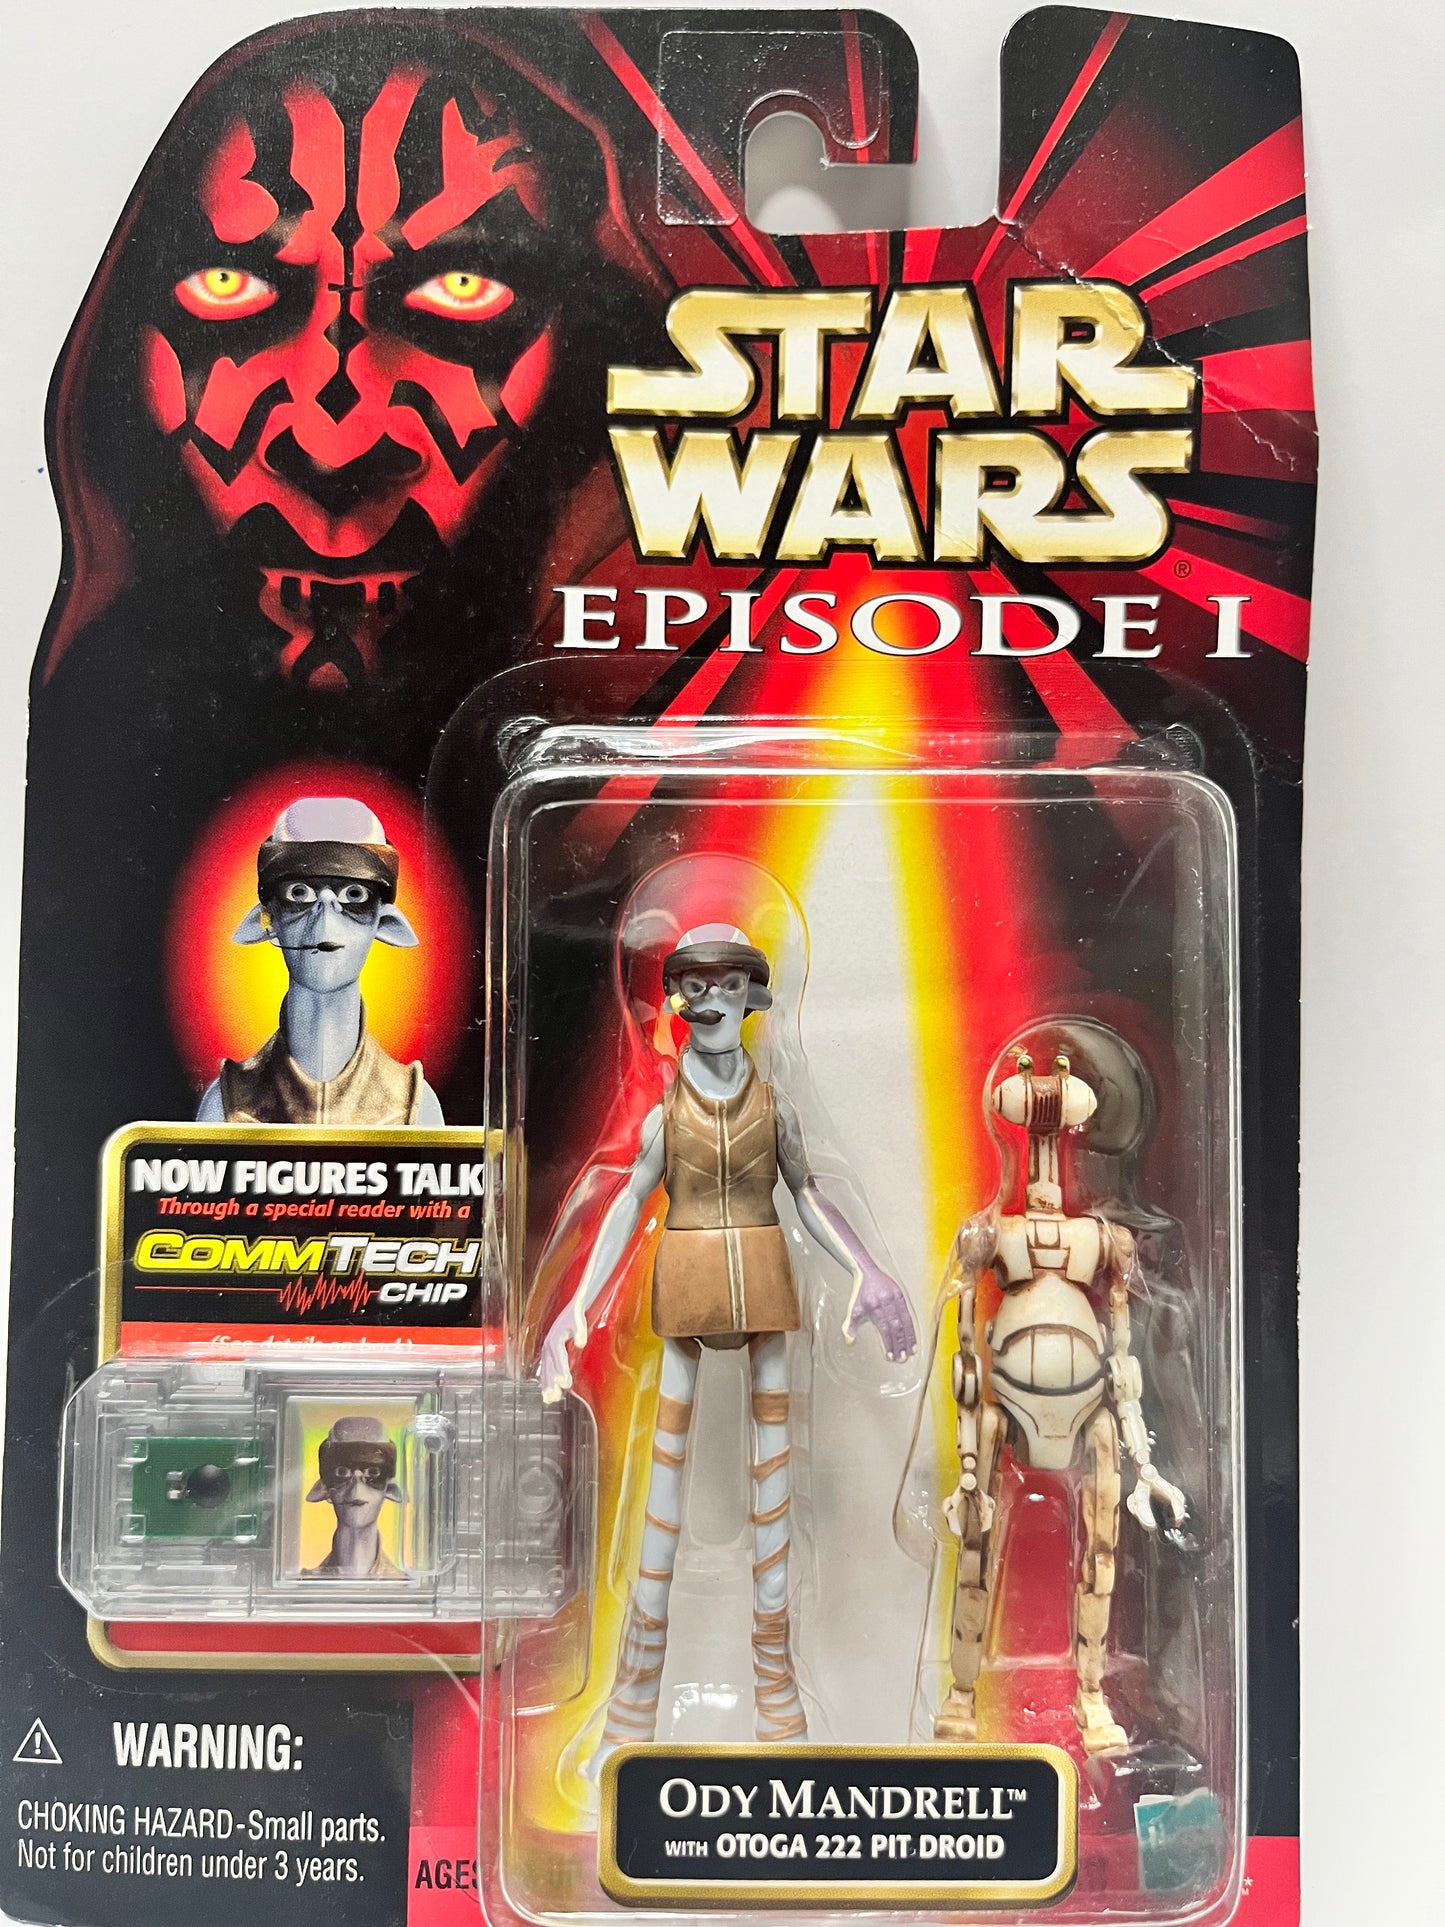 Star Wars Episode I - Ody Mandrell w/ Otoga 222 Pit Droid Figure Plus CommTech Chip